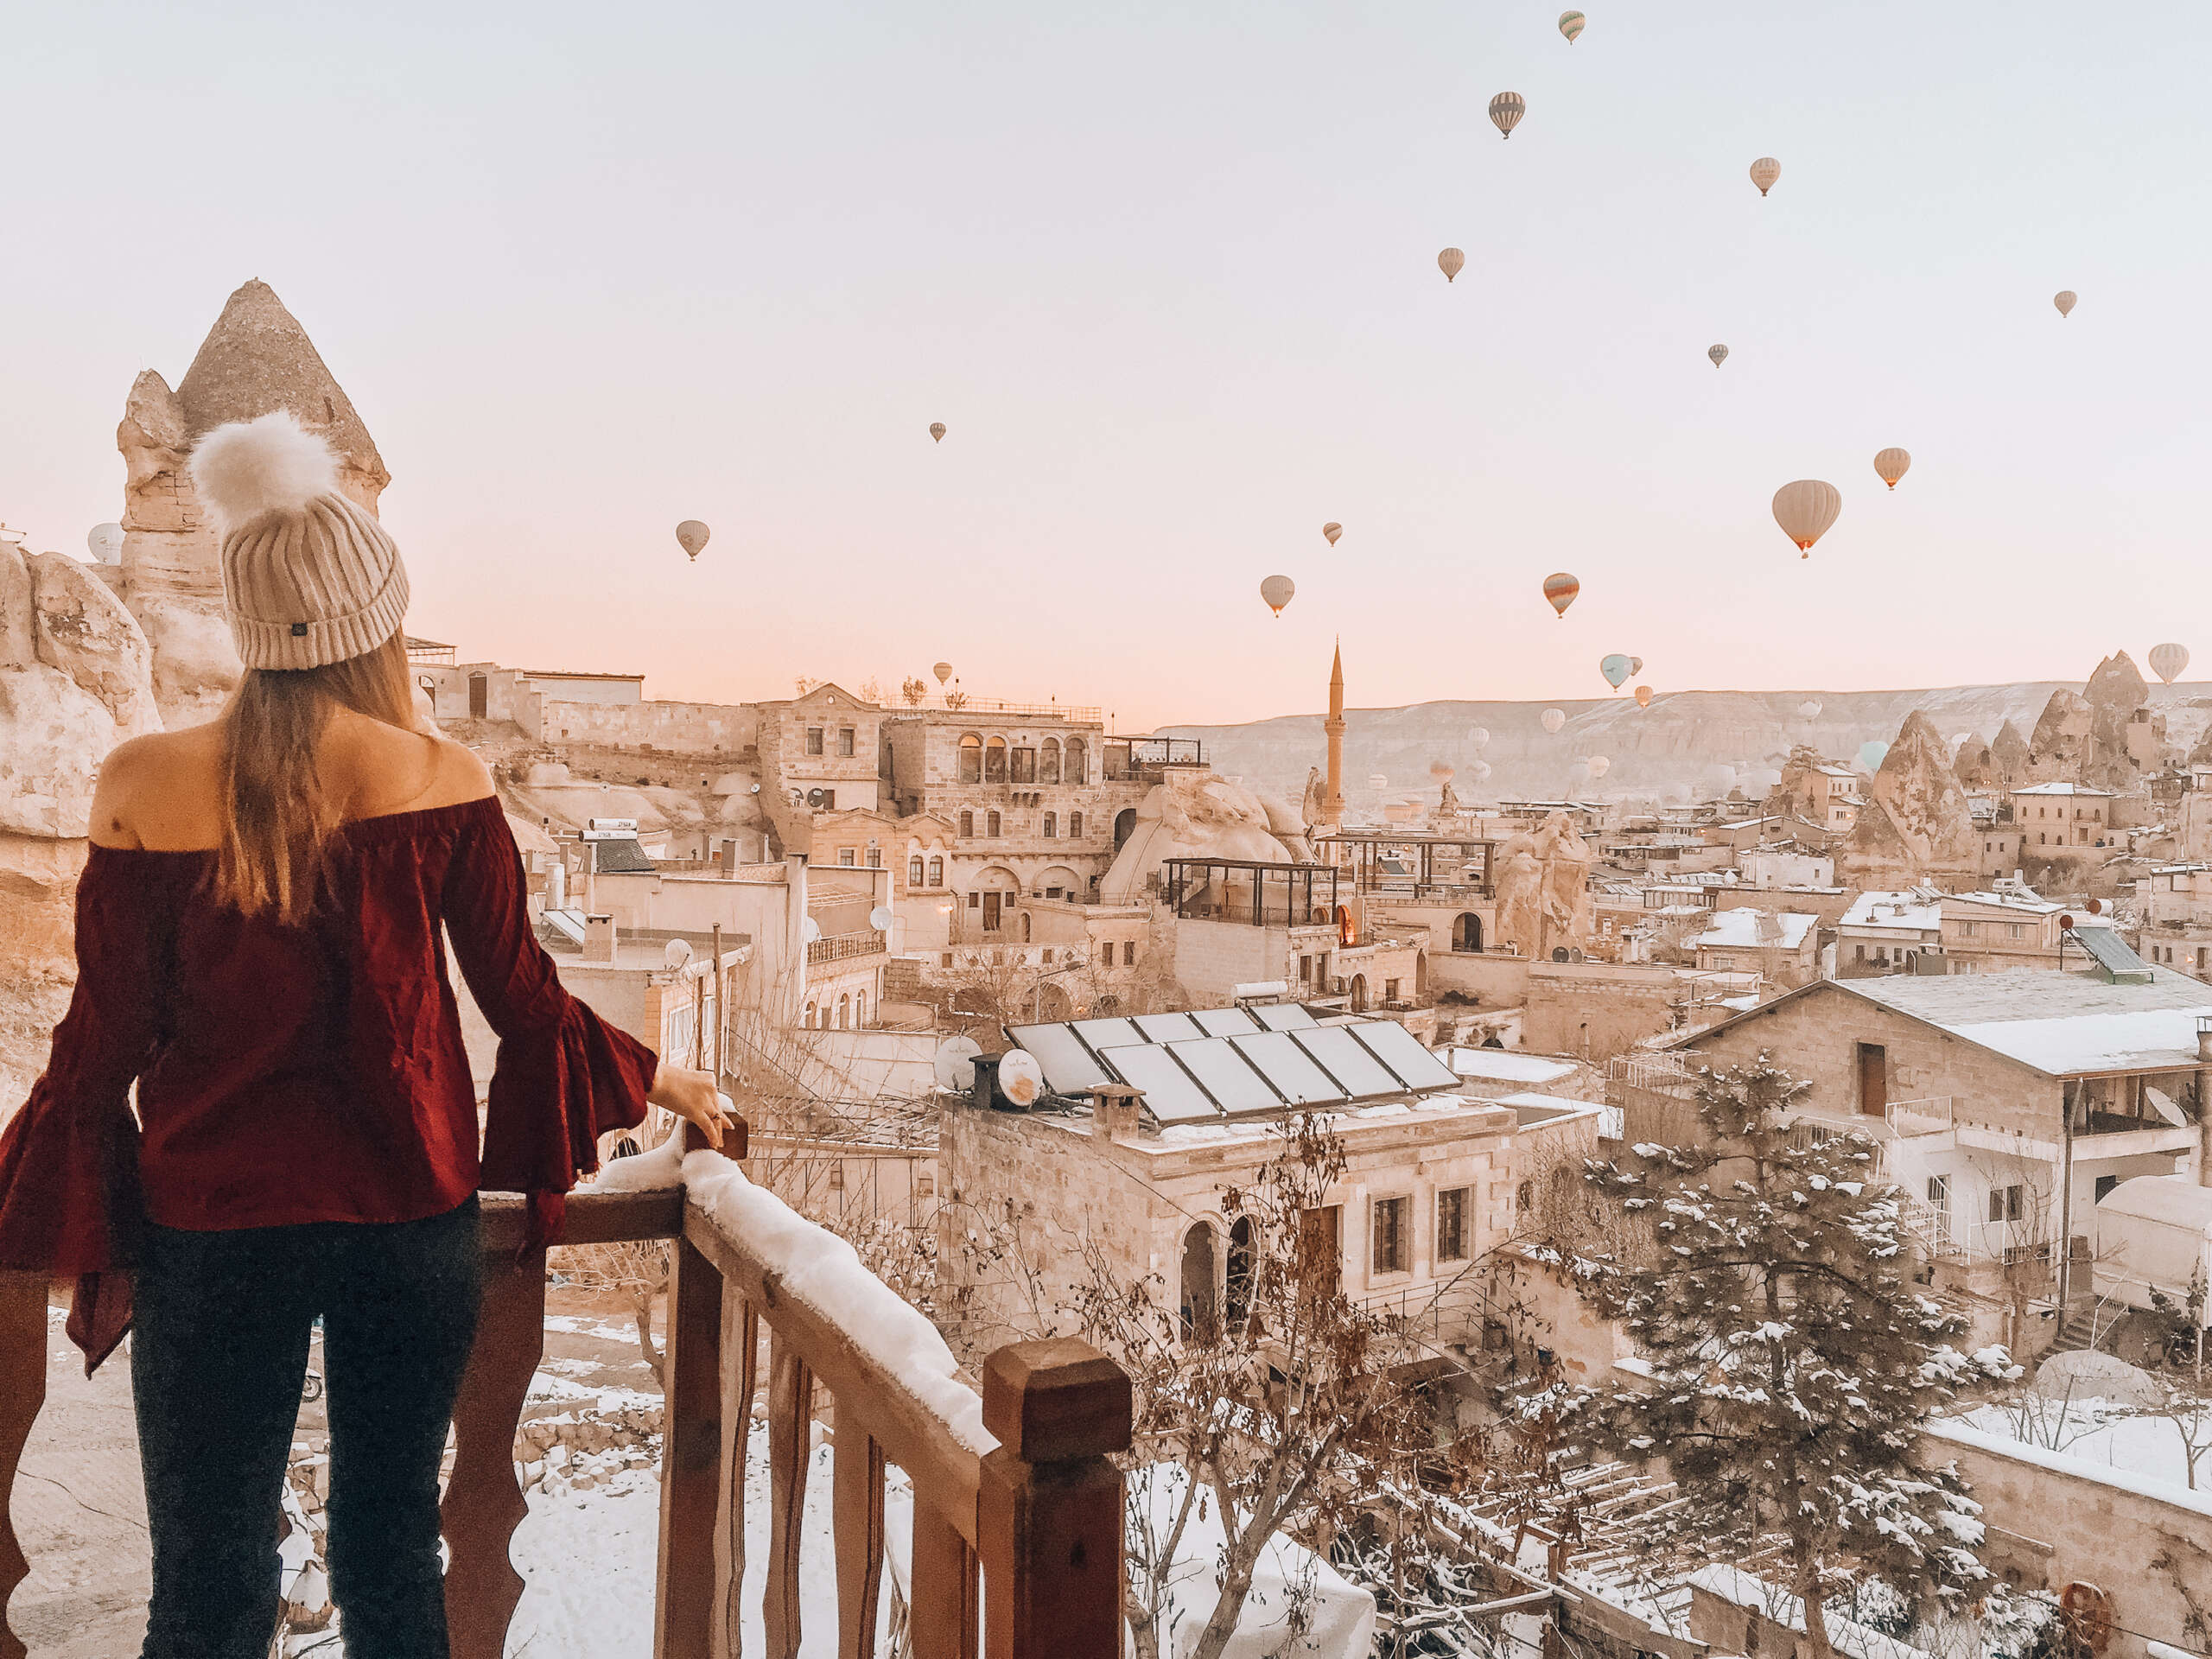 “I Went Hot Air Ballooning In Cappadocia During The Off-Season, Here’s How It Went”